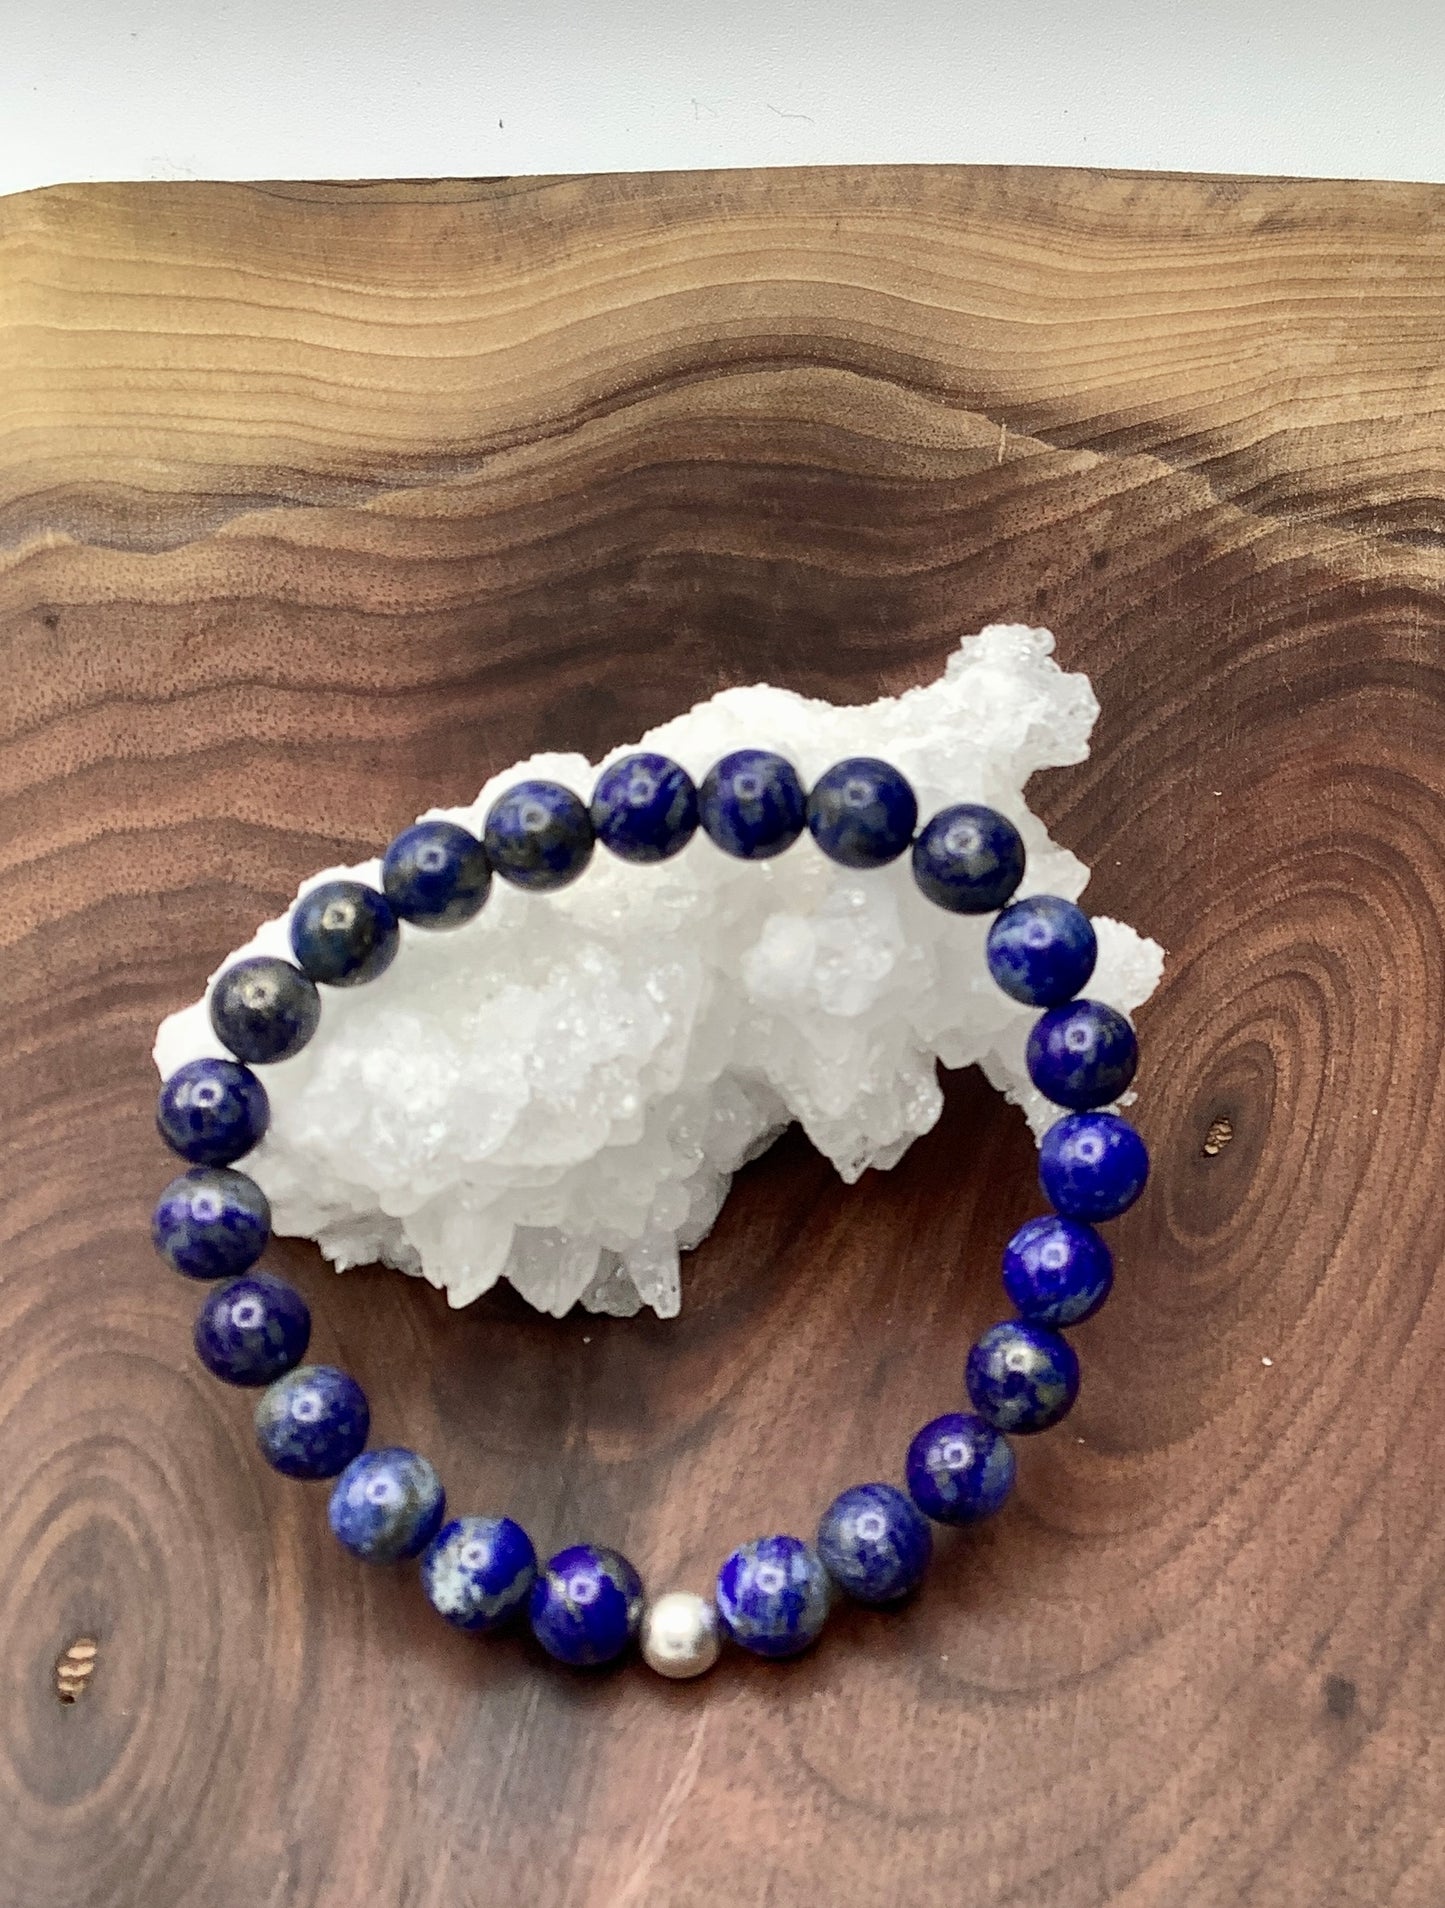 Lapis Lazuli bracelet with Sterling Silver Bead